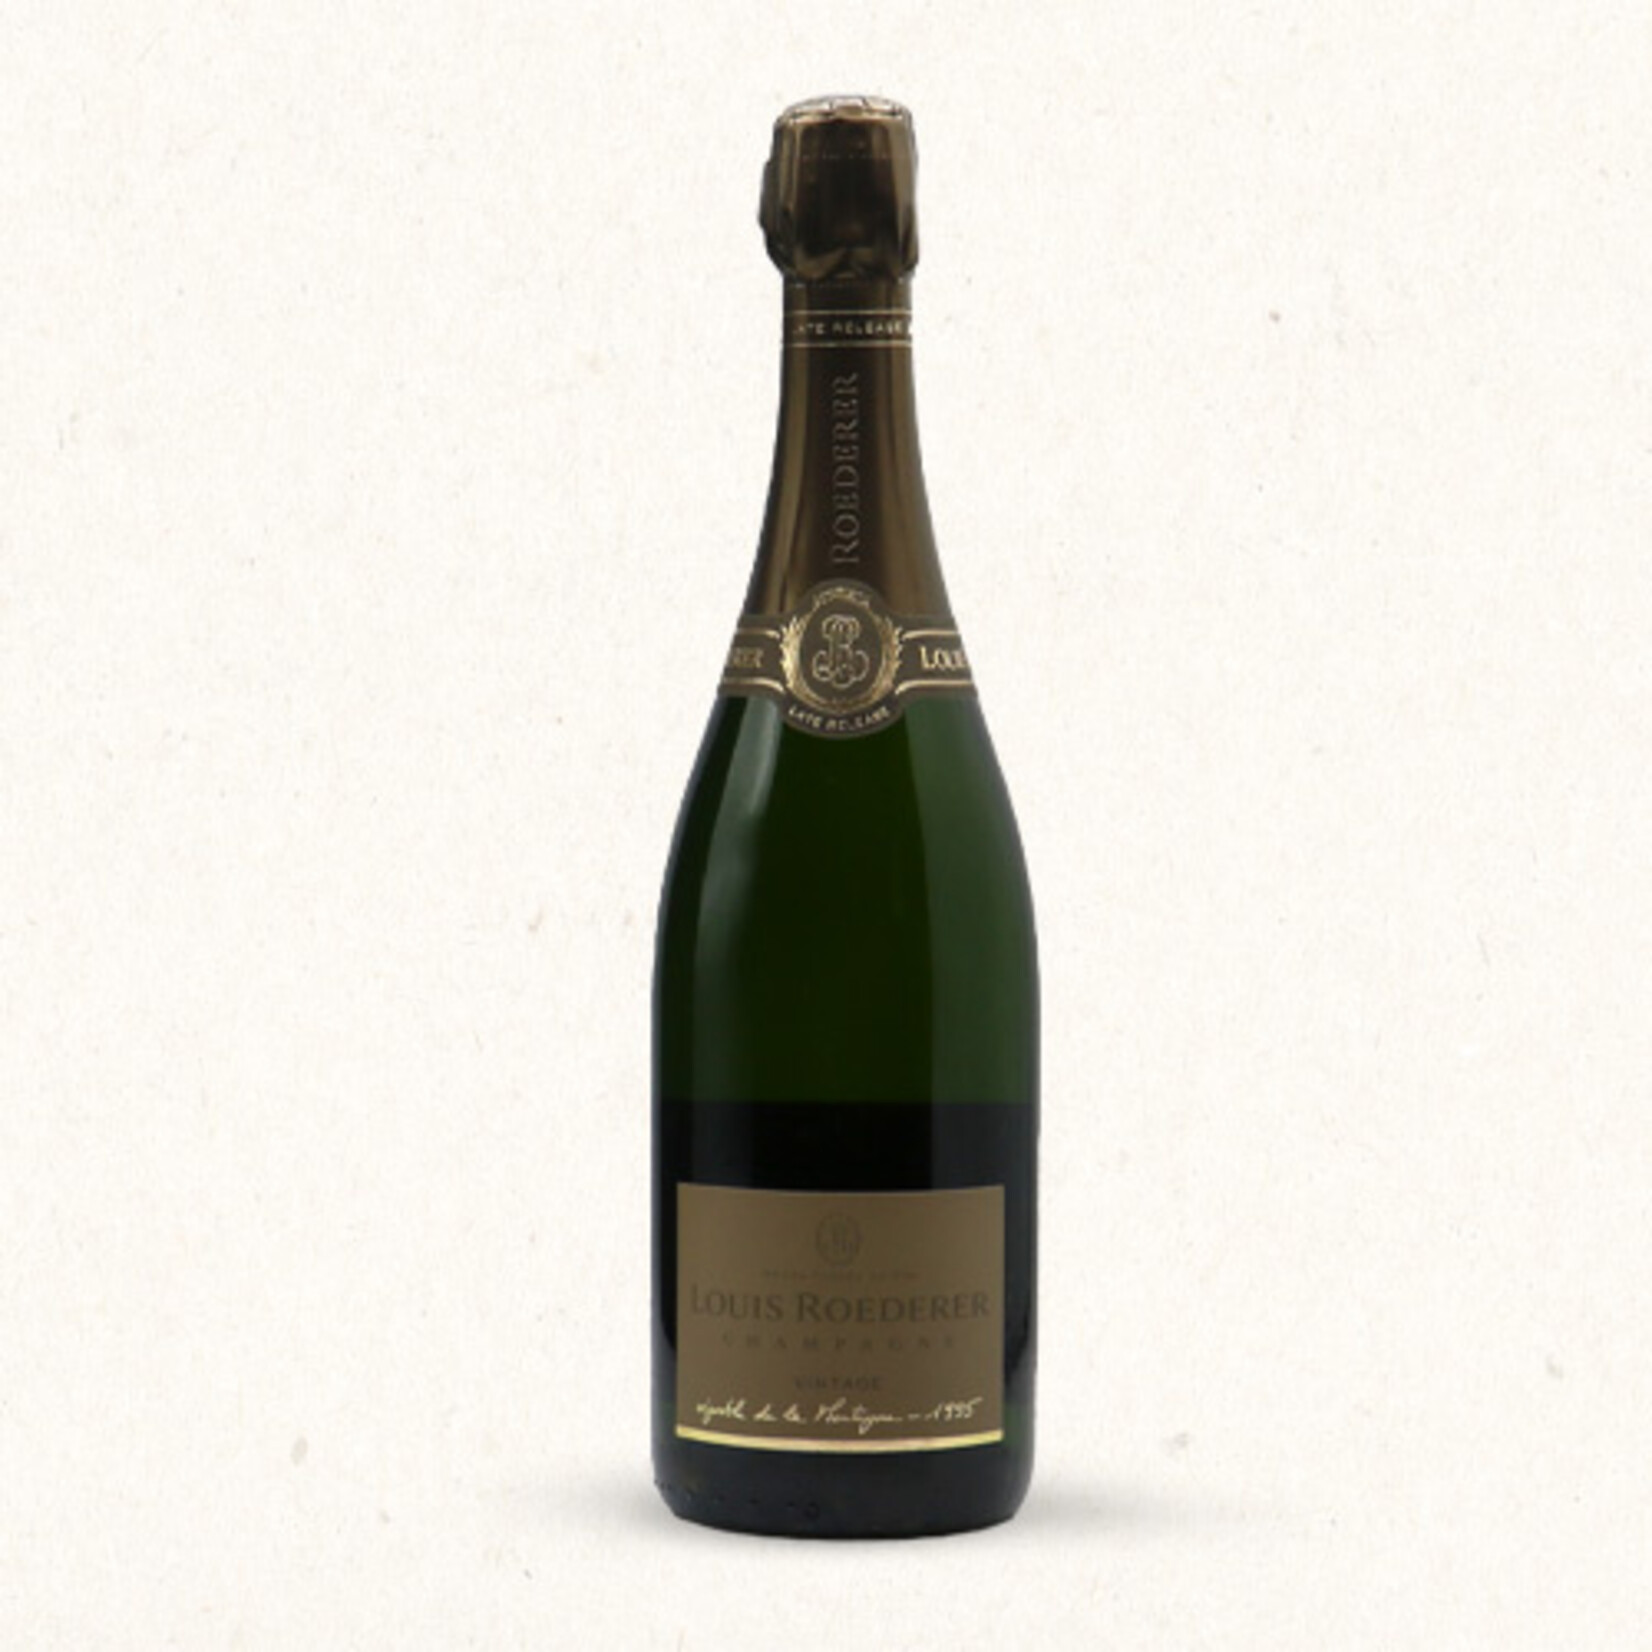 Louis Roederer Vintage 1995 late release giftbox